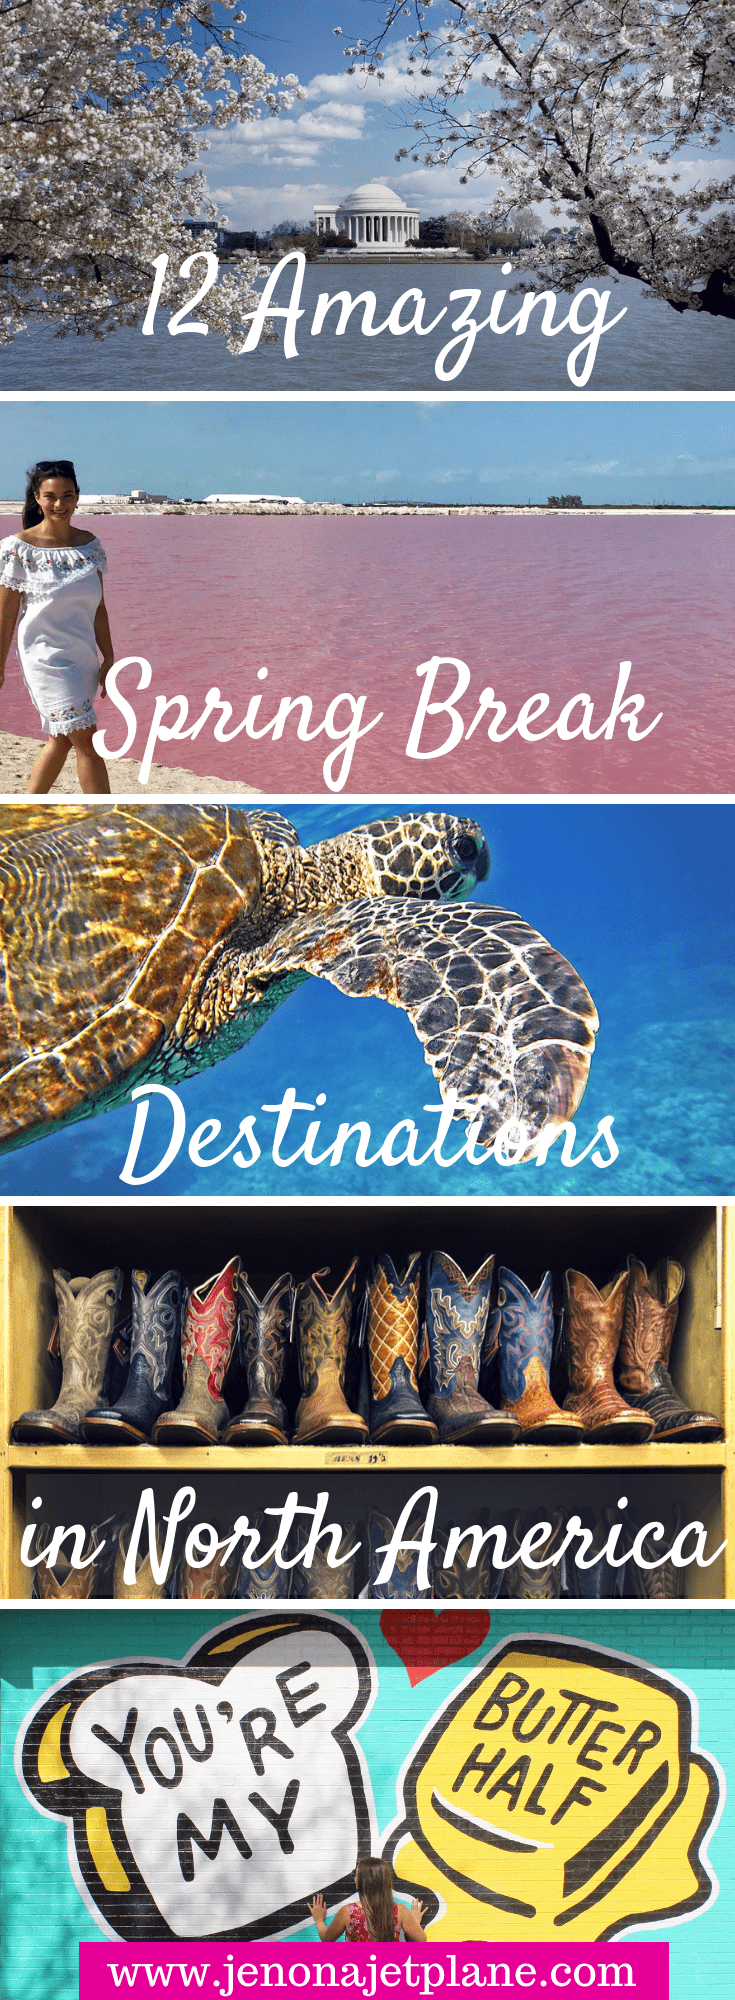 Looking for the best spring break destination in North America? From pink lakes to slot canyons, these warm and unforgettable getaways got you covered. What are you waiting for? It's time to book your next vacation. Save to your travel board for future reference. #springbreakdestinations #springbreakideas #springbreak #travelinspiration #travelunitedstates #travelamerica 